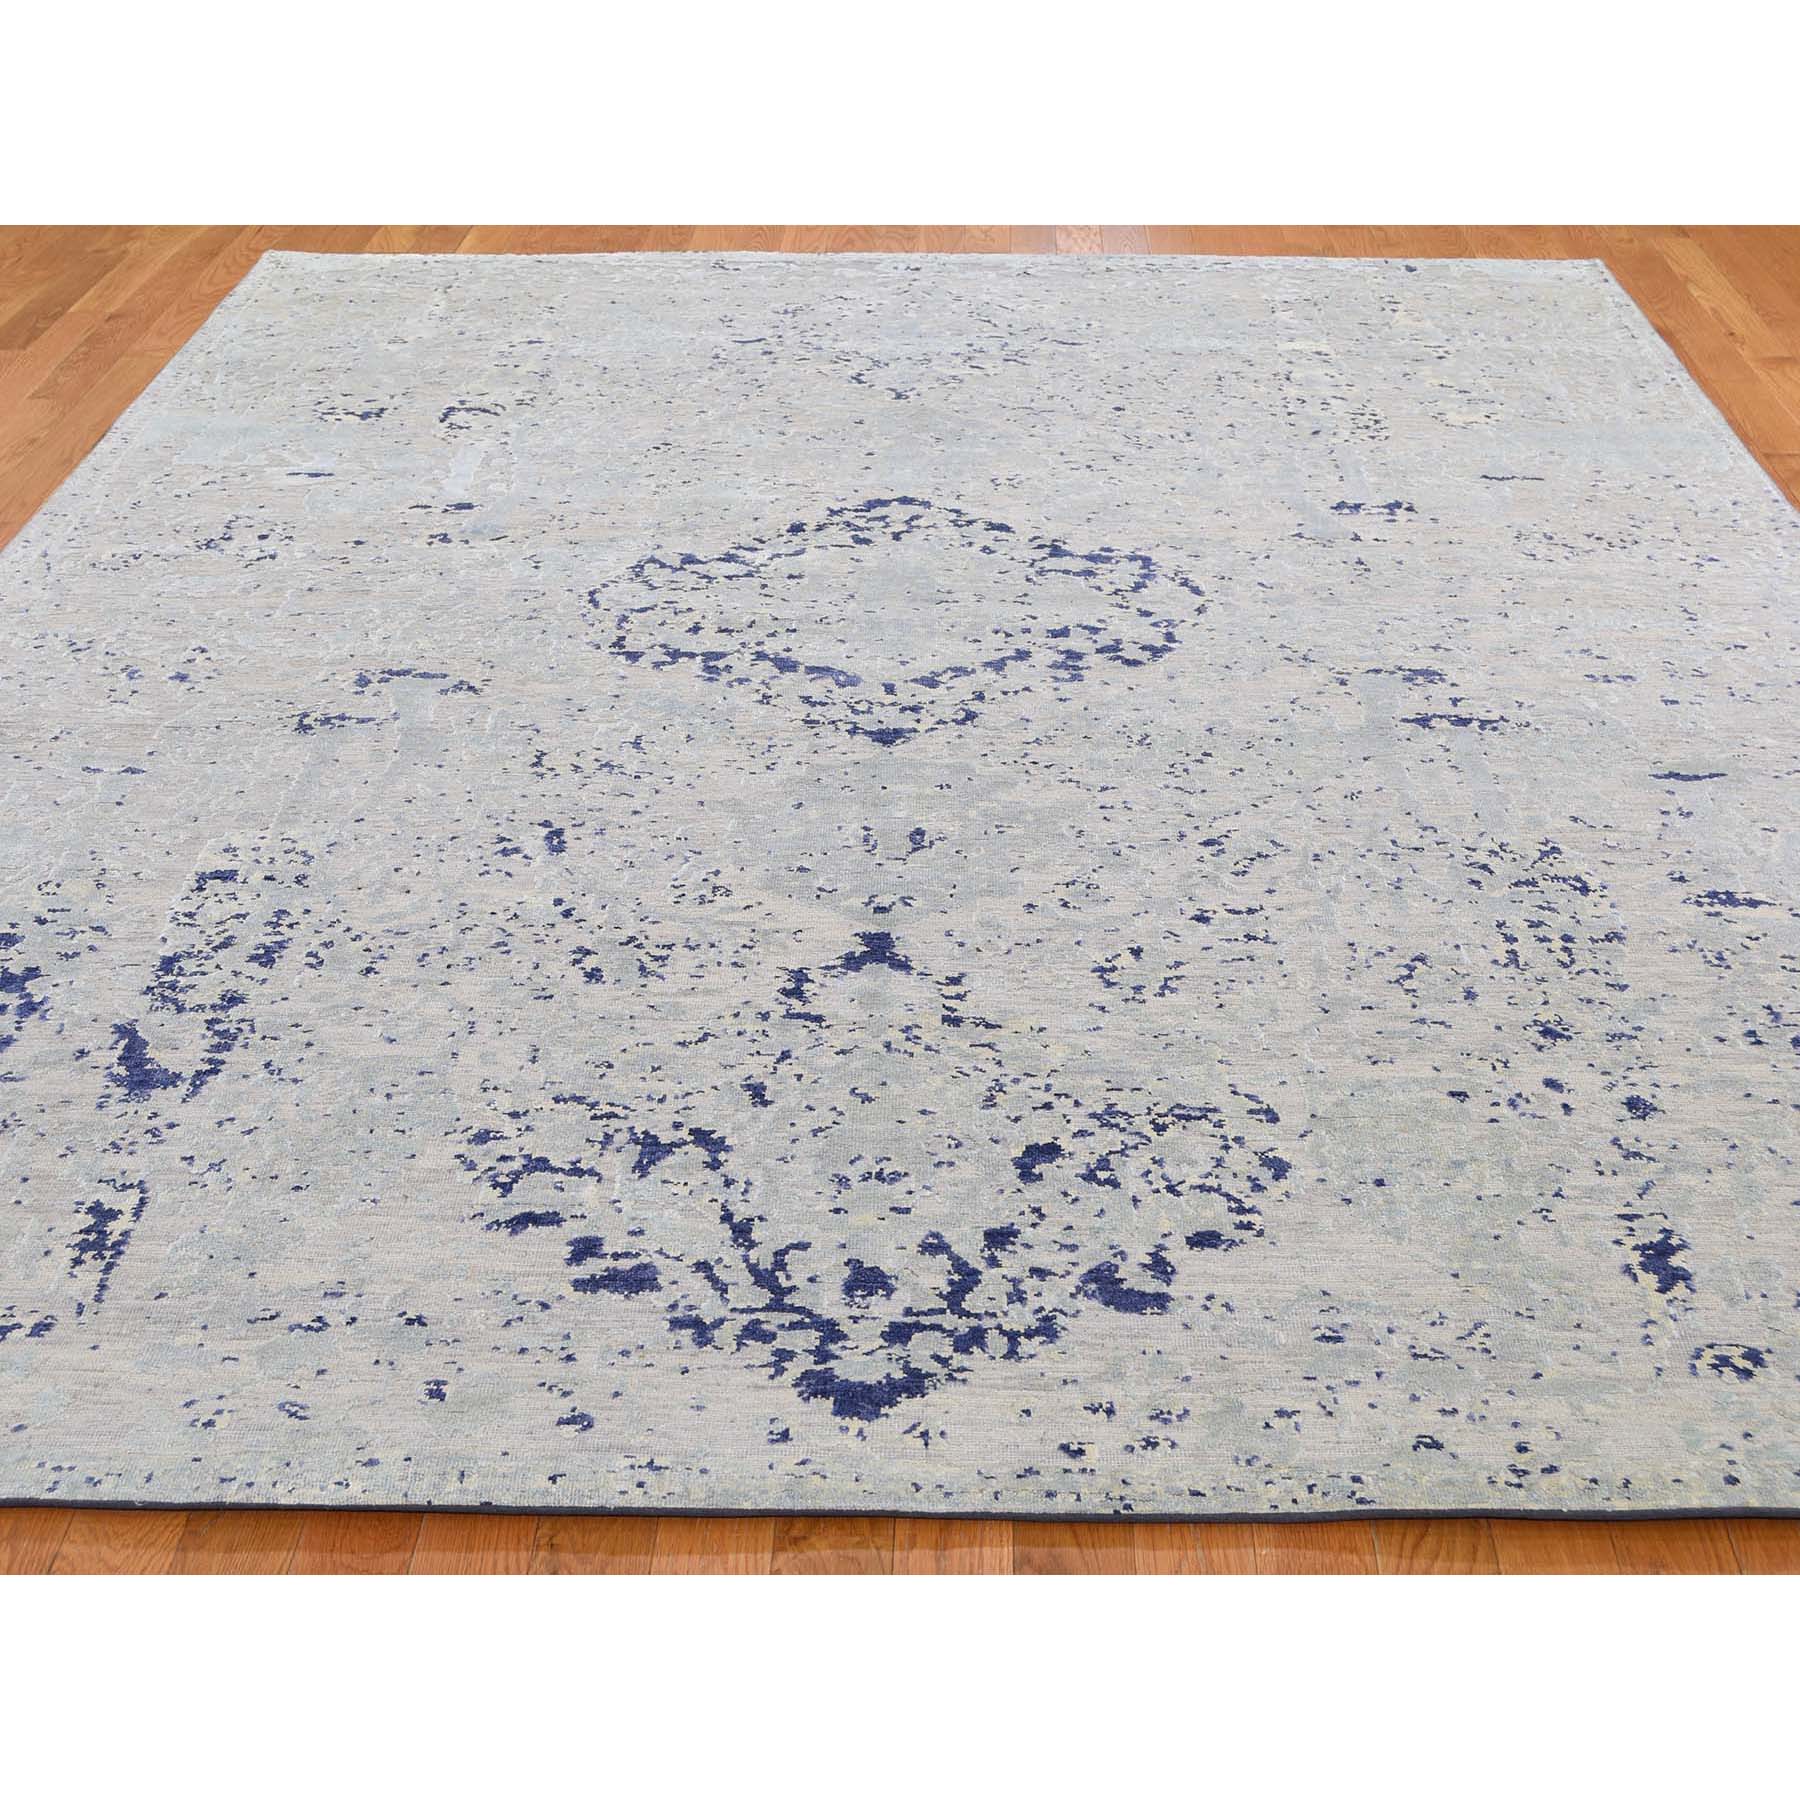 7-10 x10-5  Diminishing Cypress Tree With Medallion Design Silk With Oxidized Wool Textured Hand-Knotted Oriental Rug 